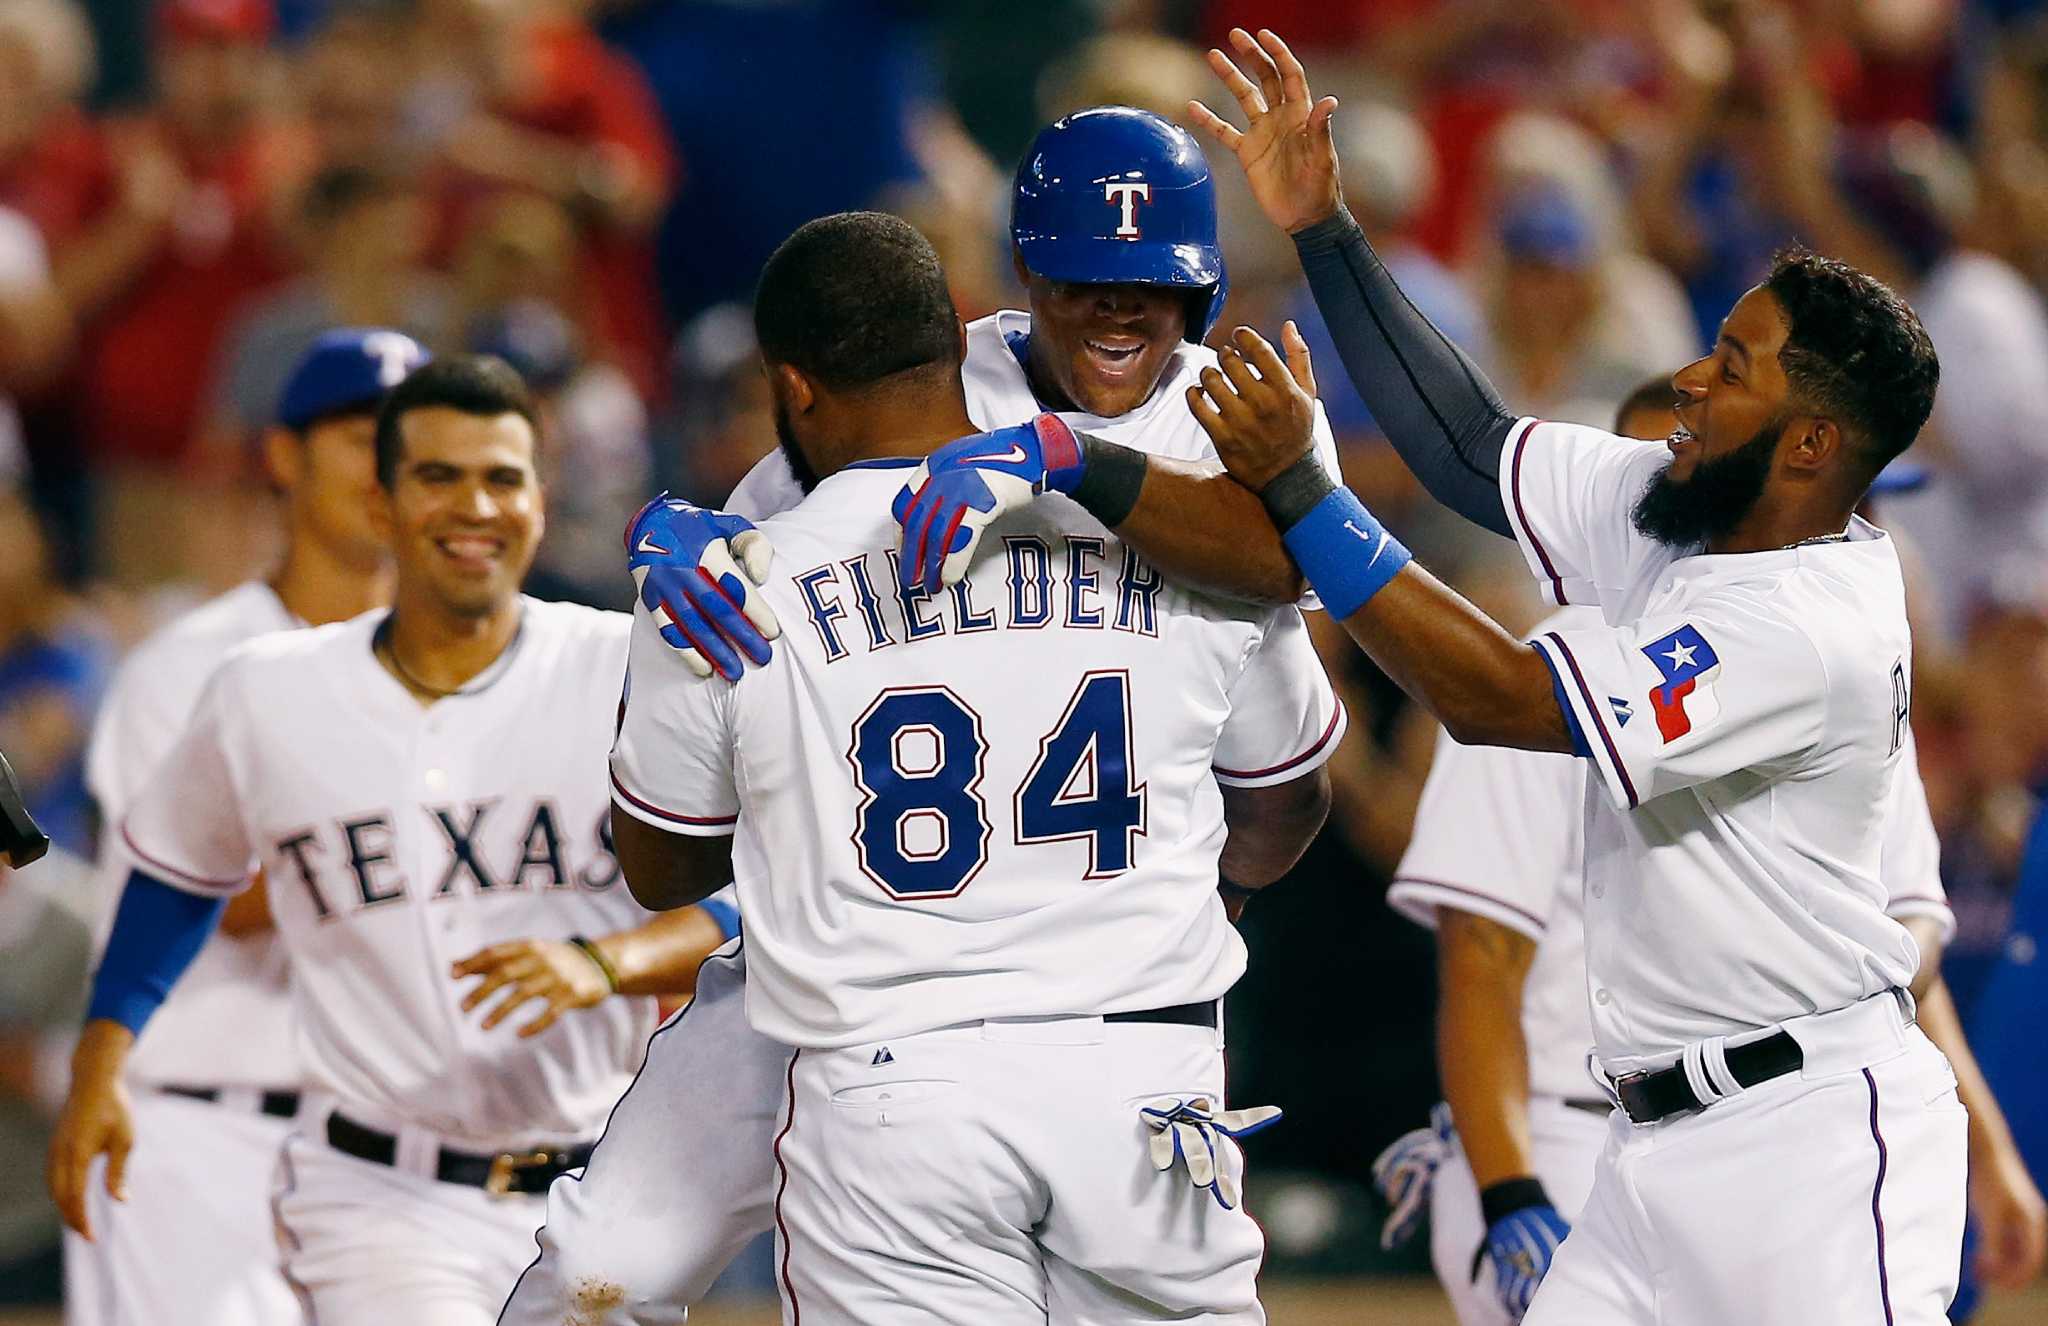 Adrian Beltre and Elvis Andrus by Tom Pennington